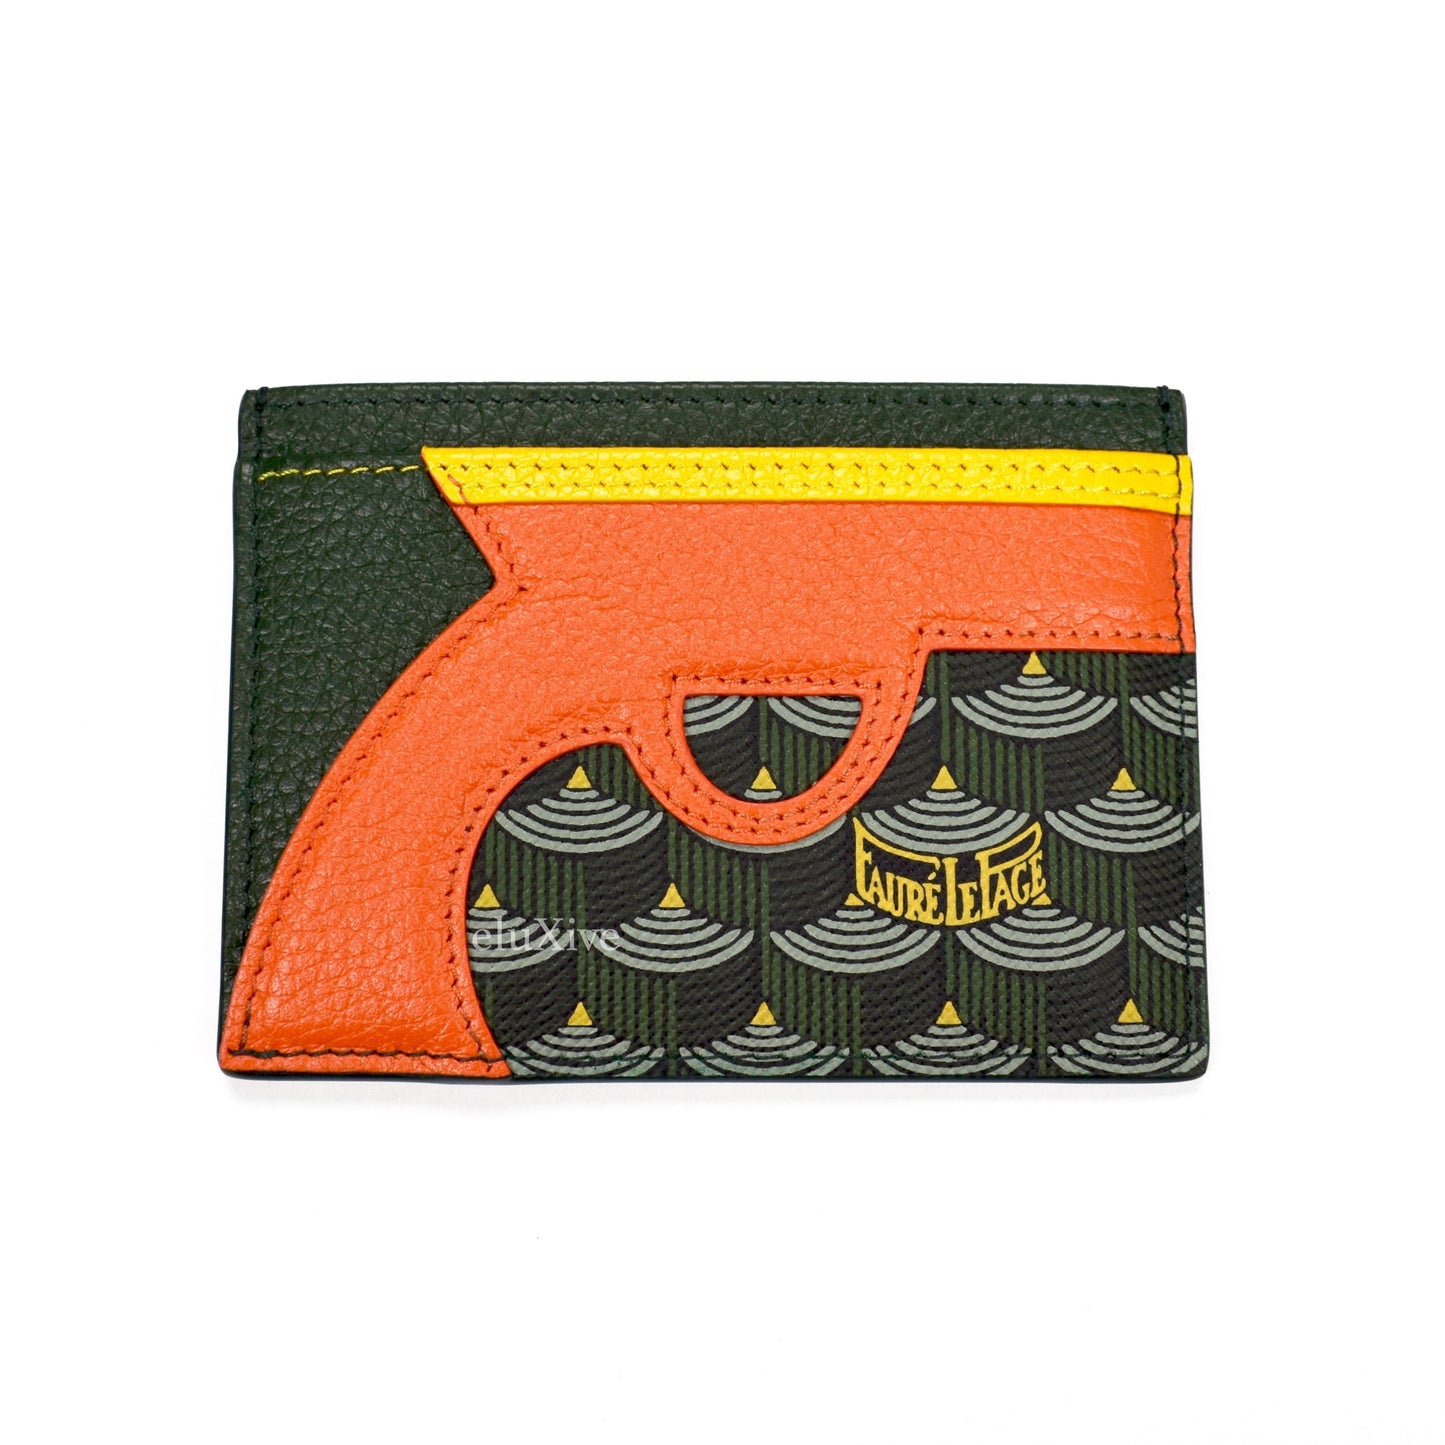 Faure Le Page - Empire Green Gangsta Card Holder